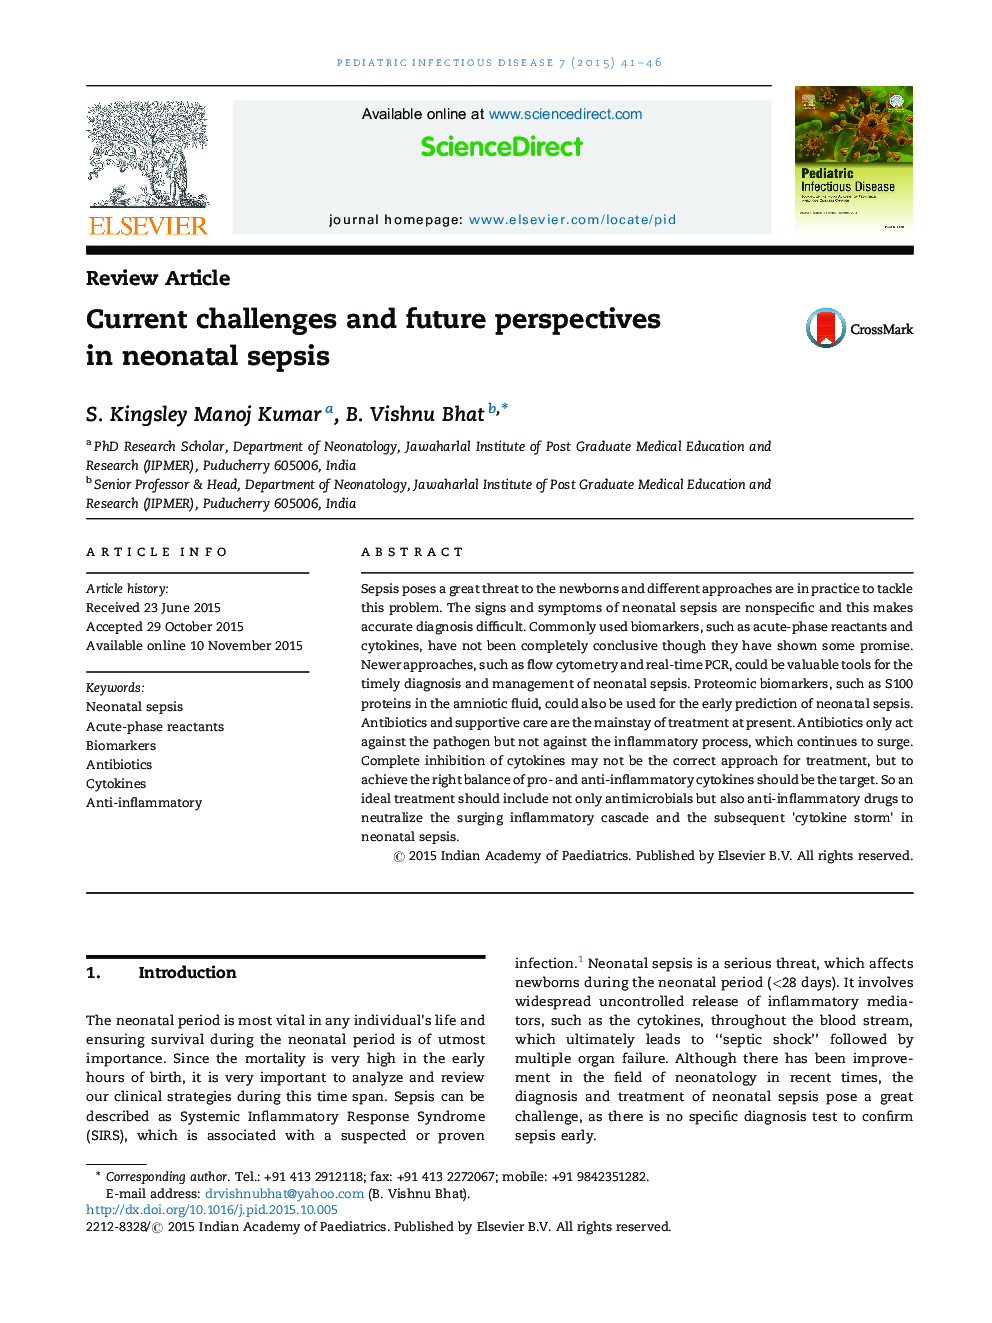 Current challenges and future perspectives in neonatal sepsis